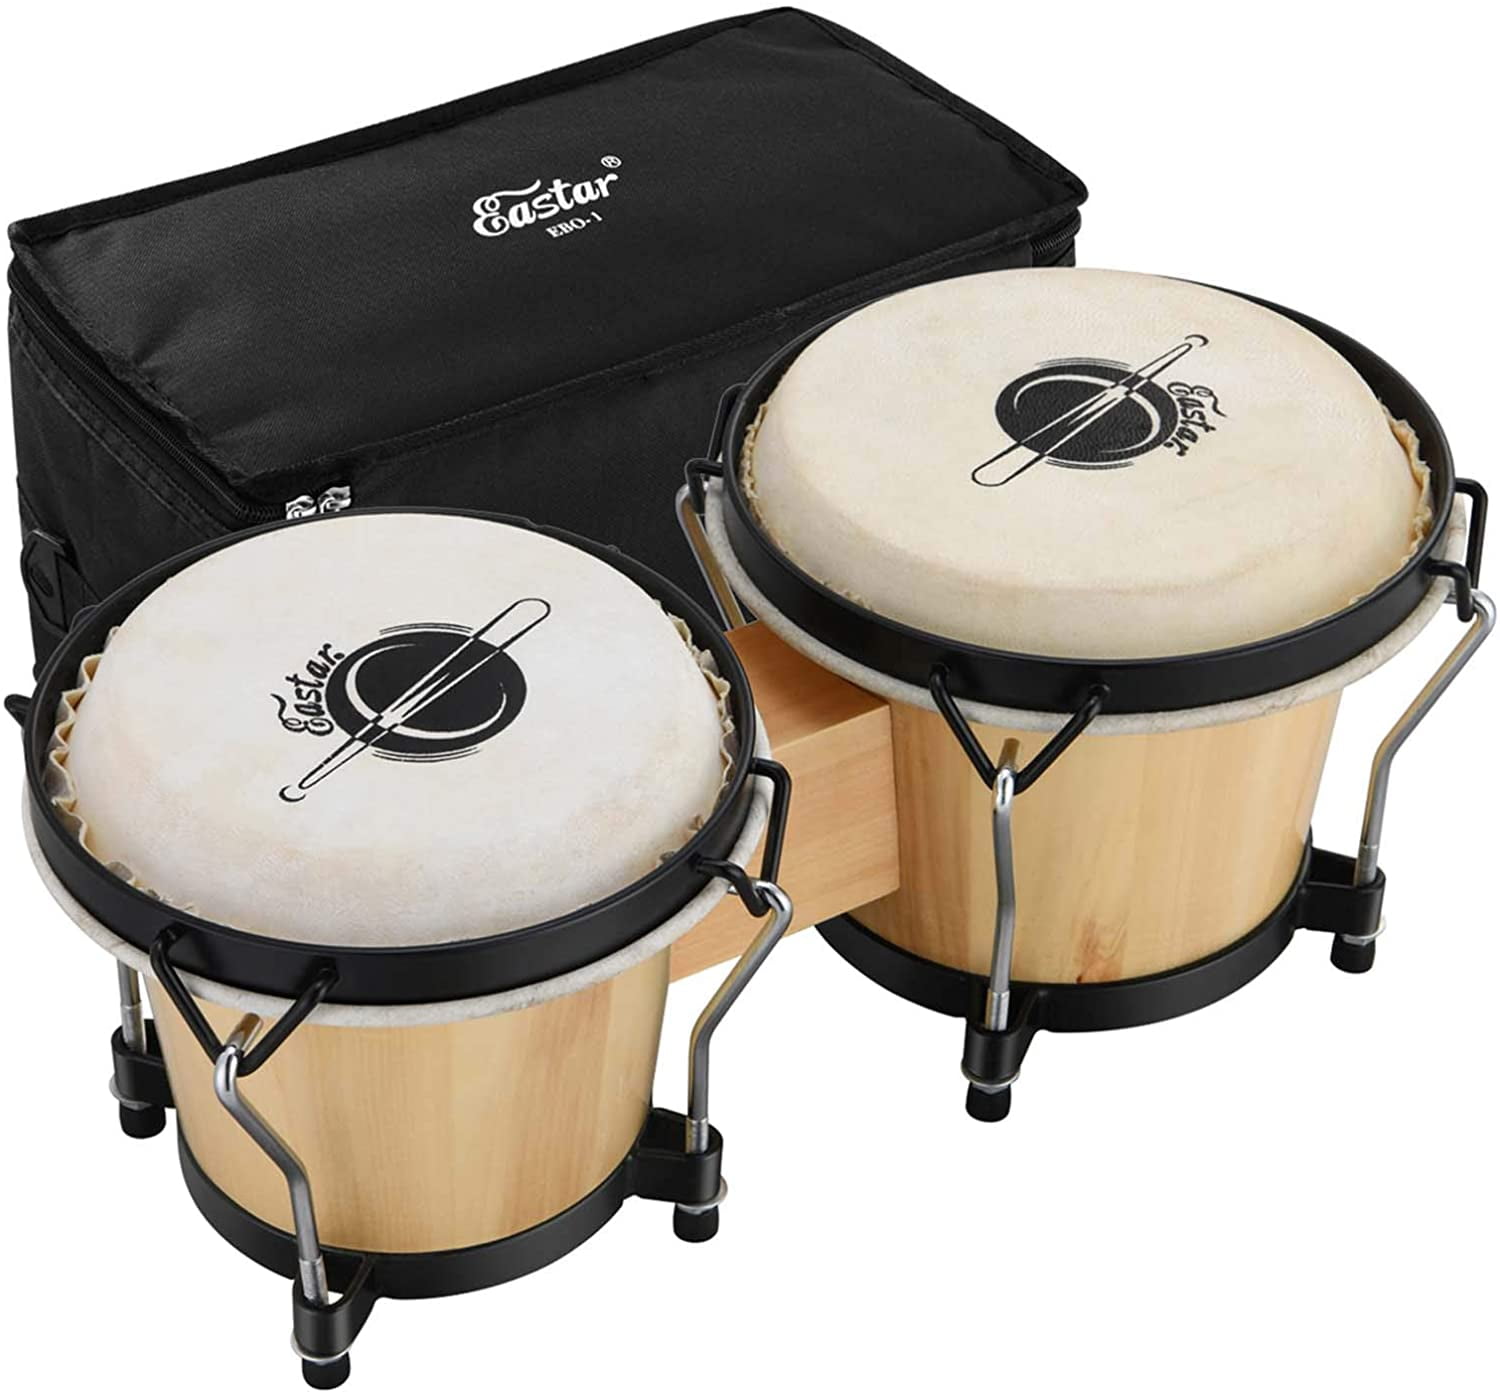 Westco 8 Pre-Tuned Frame Drums 